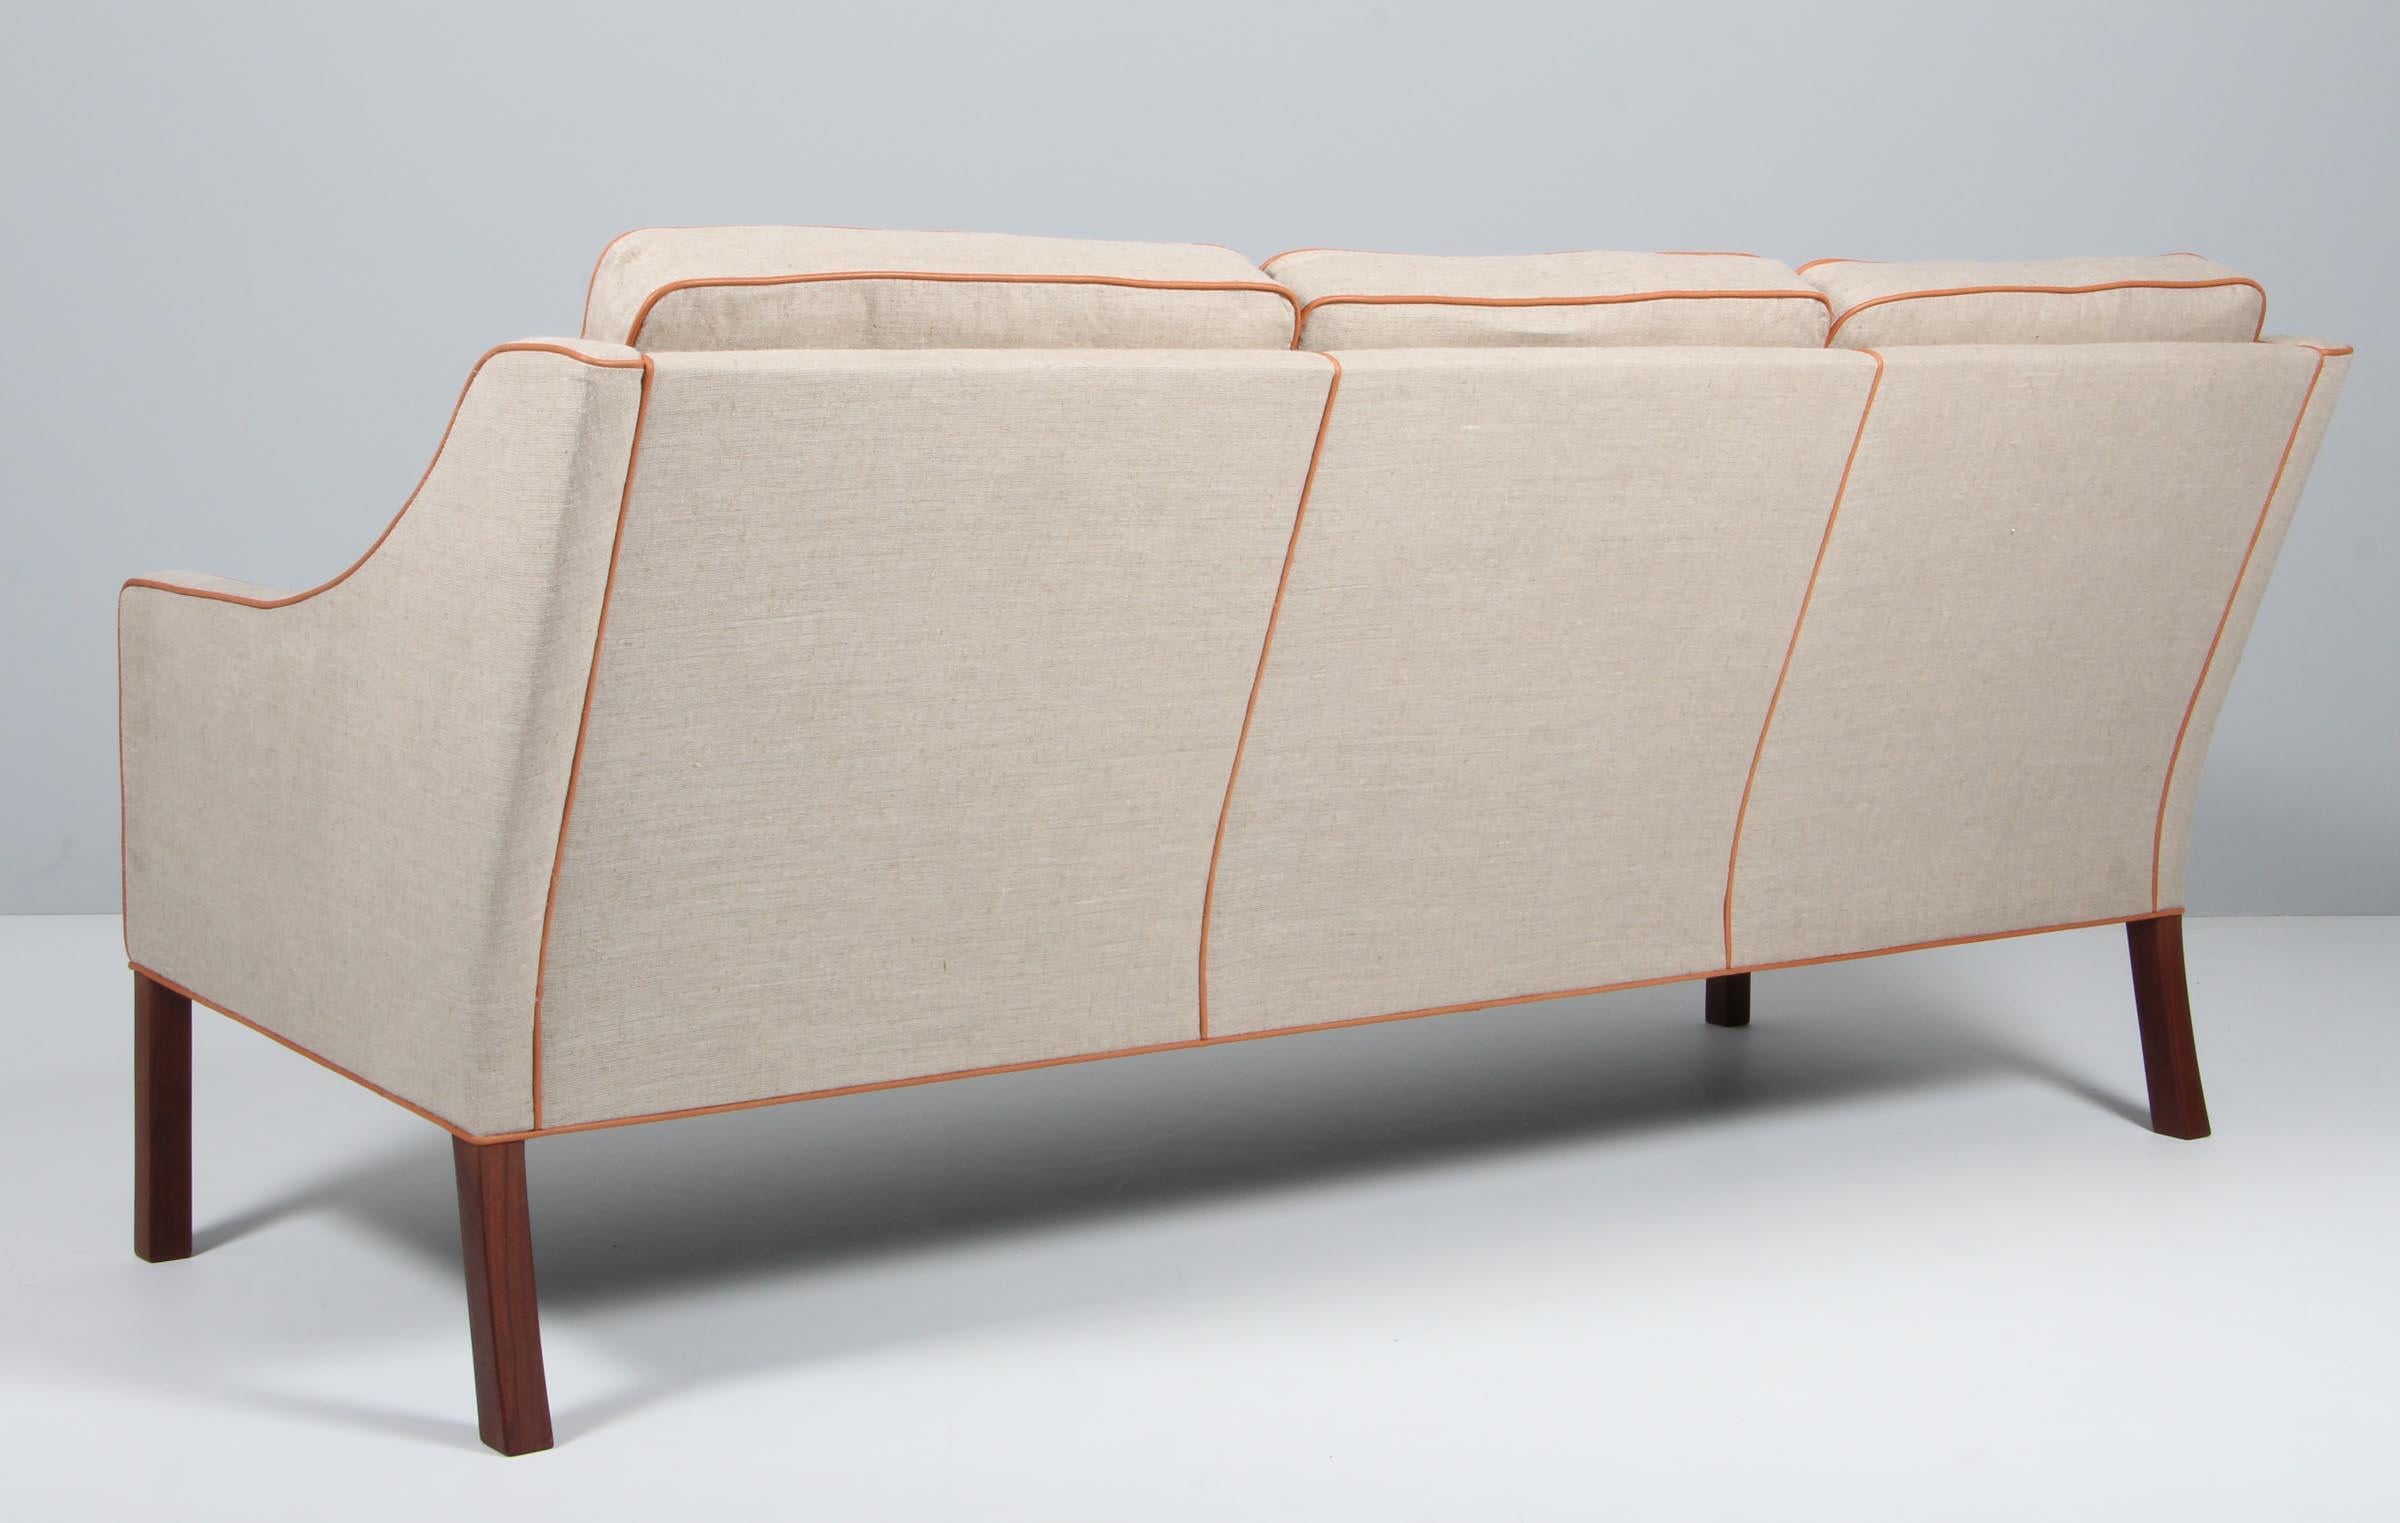 Børge Mogensen three-seat sofa new upholstered with canvas and tan aniline leather

Legs of mahogany.

Model 2209, made by Fredericia furniture.